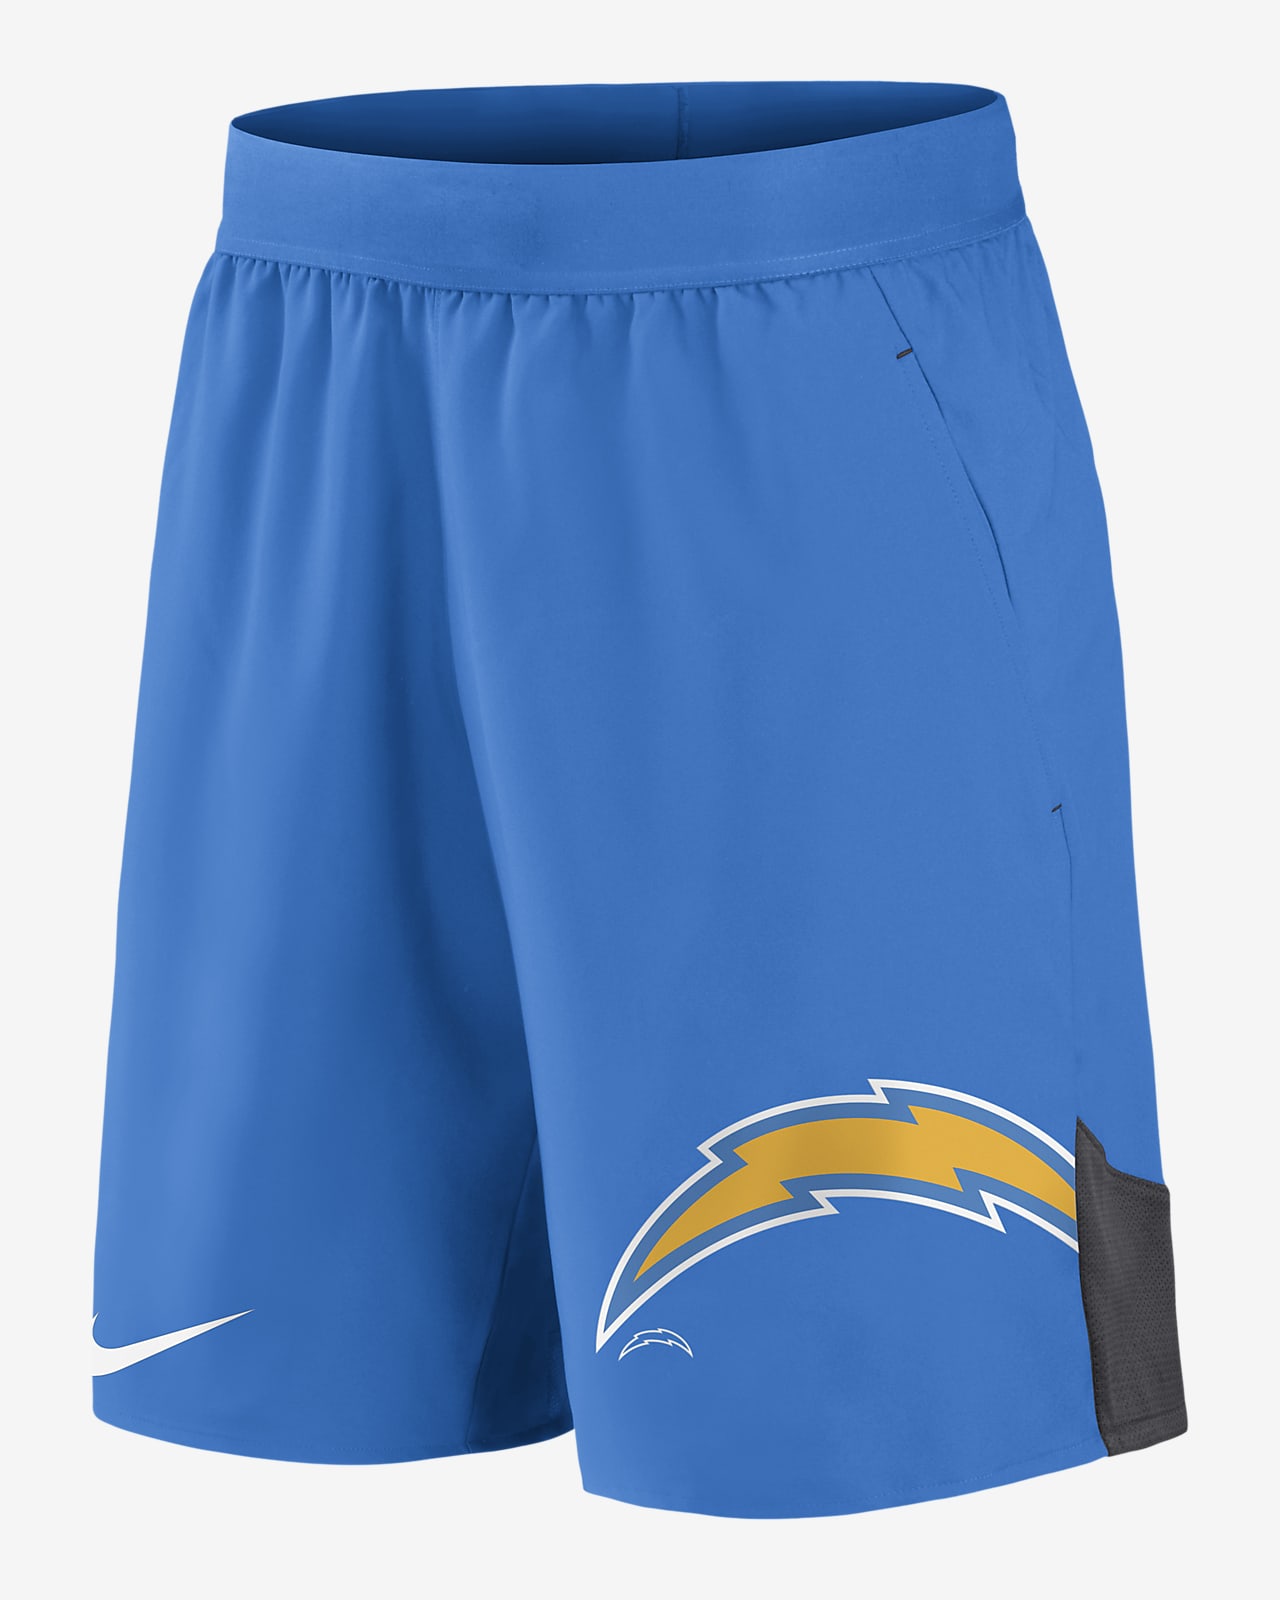 Nike Dri-FIT Stretch (NFL Los Angeles Chargers) Men's Shorts